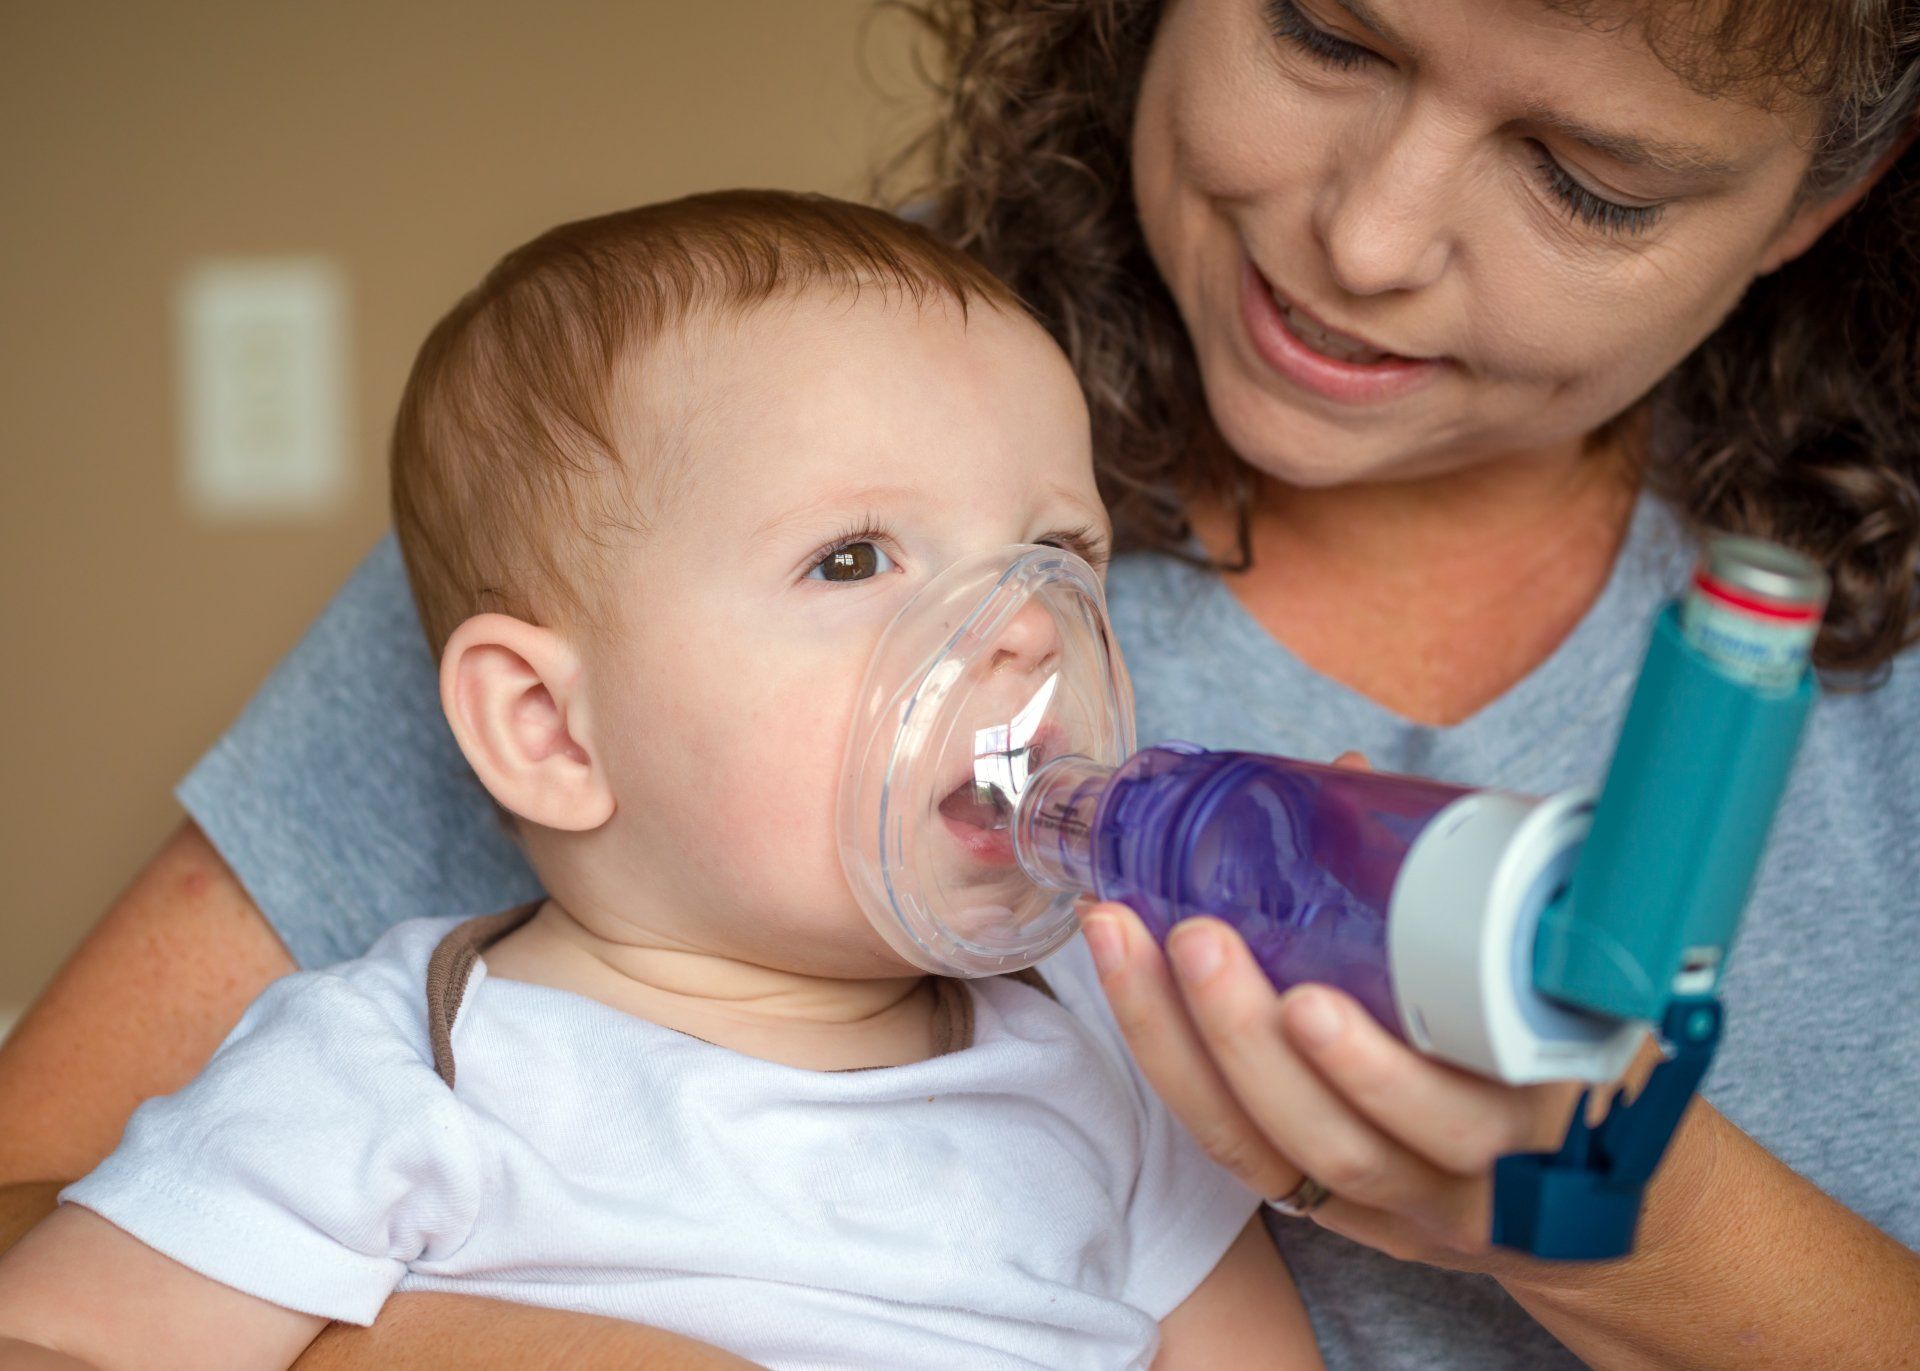 a woman is holding a baby who is using an inhaler